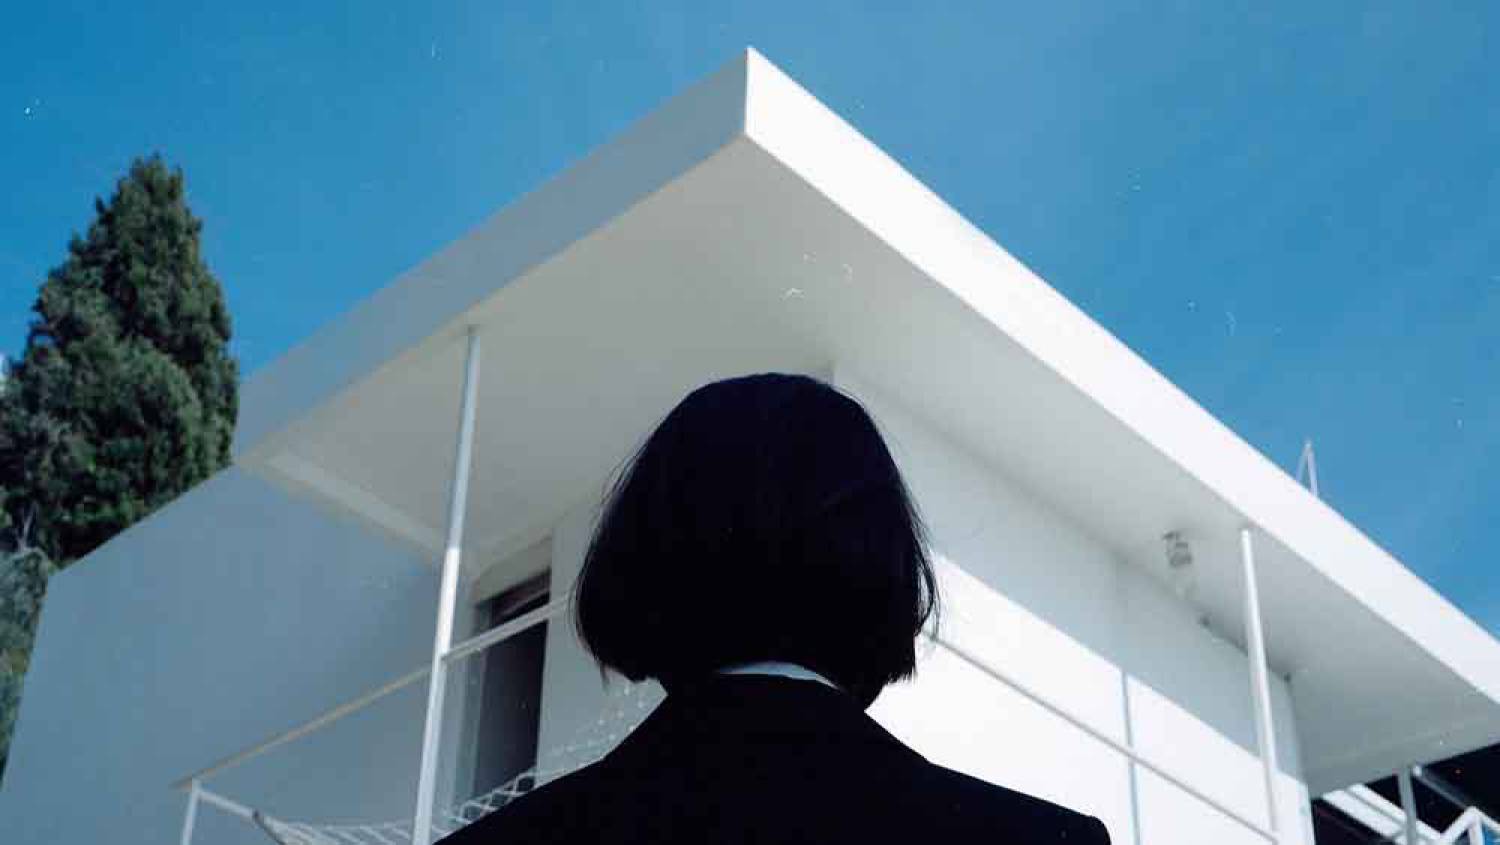 DOK.fest: E.1027 – Eileen Gray and the house by the sea